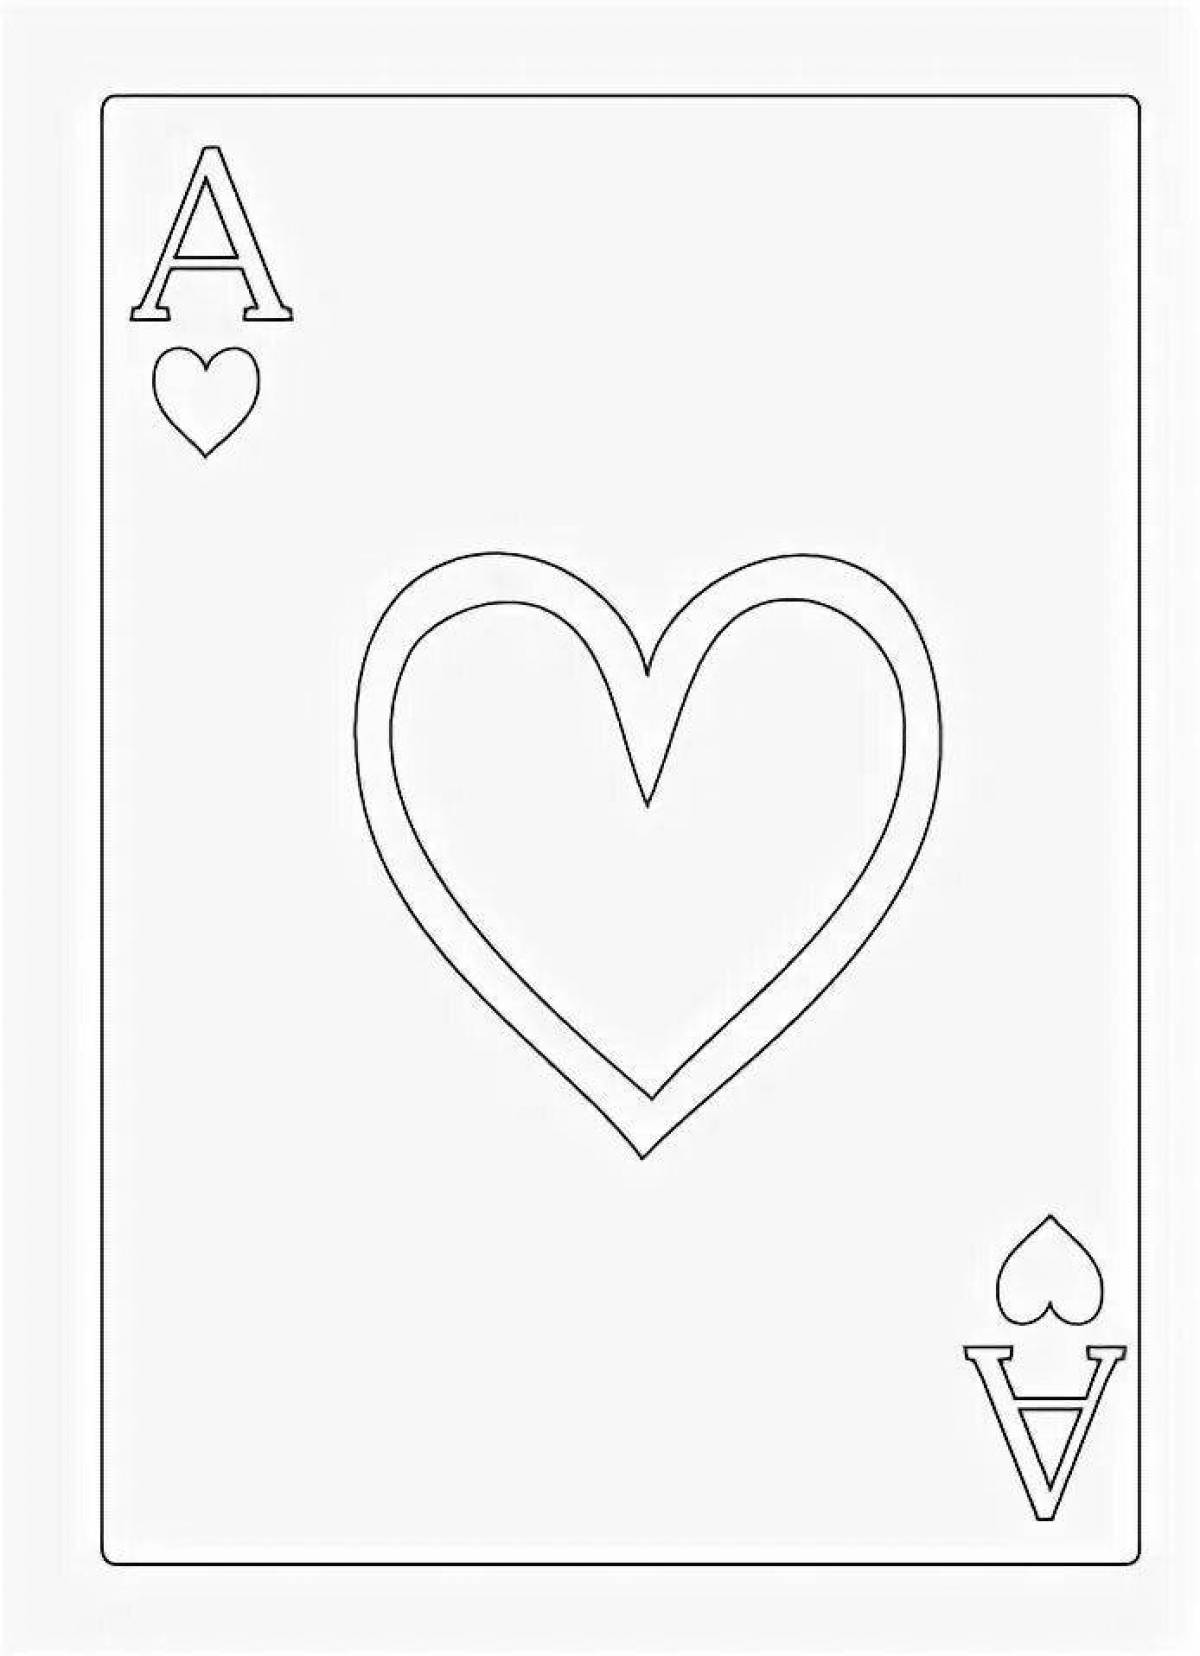 Adorable playing card coloring book